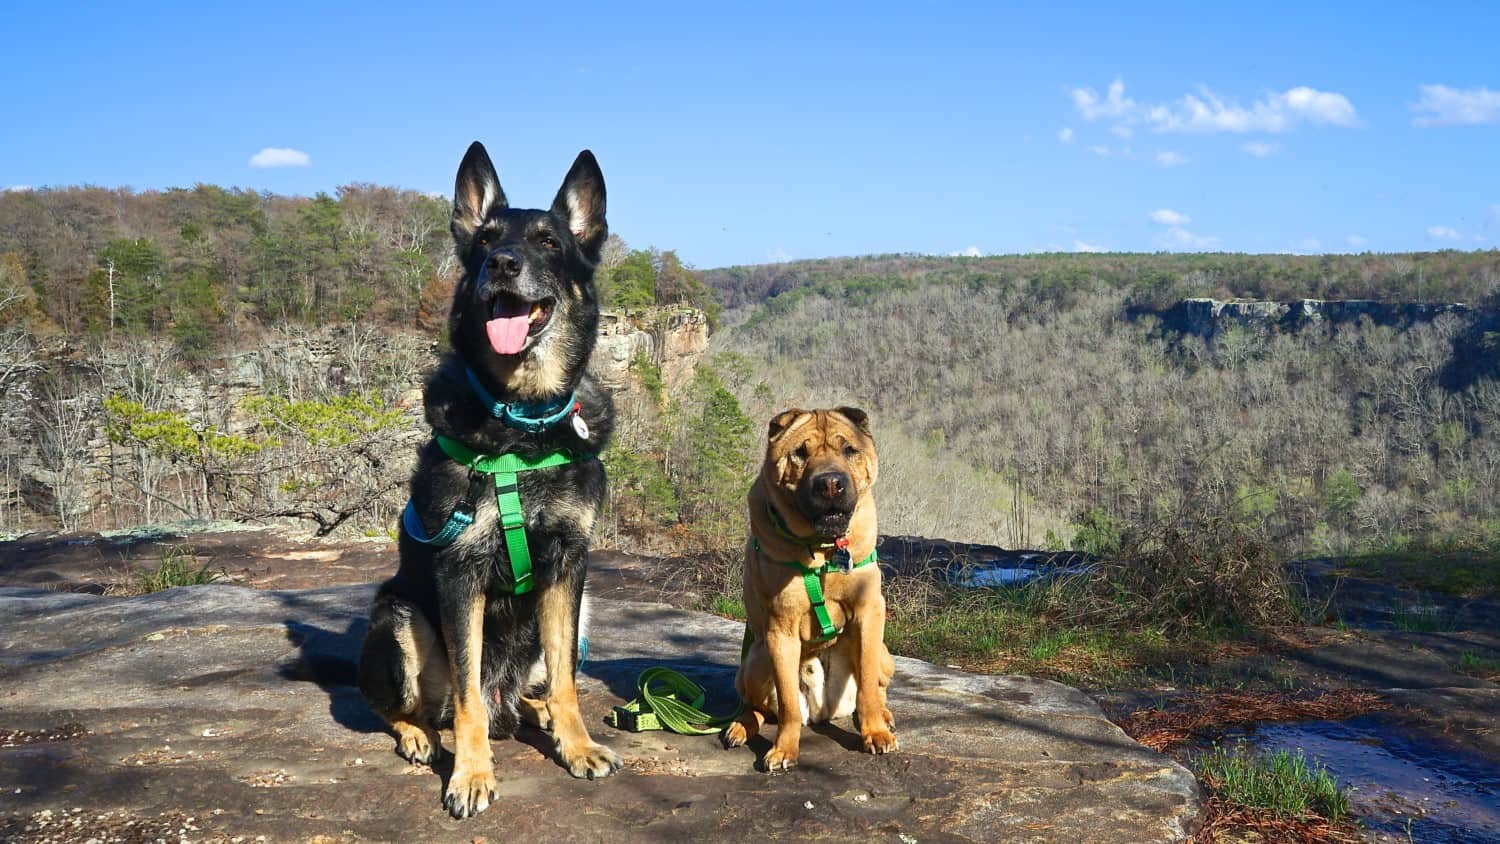 Alabama's Top Pet Friendly Attraction: Little River Canyon